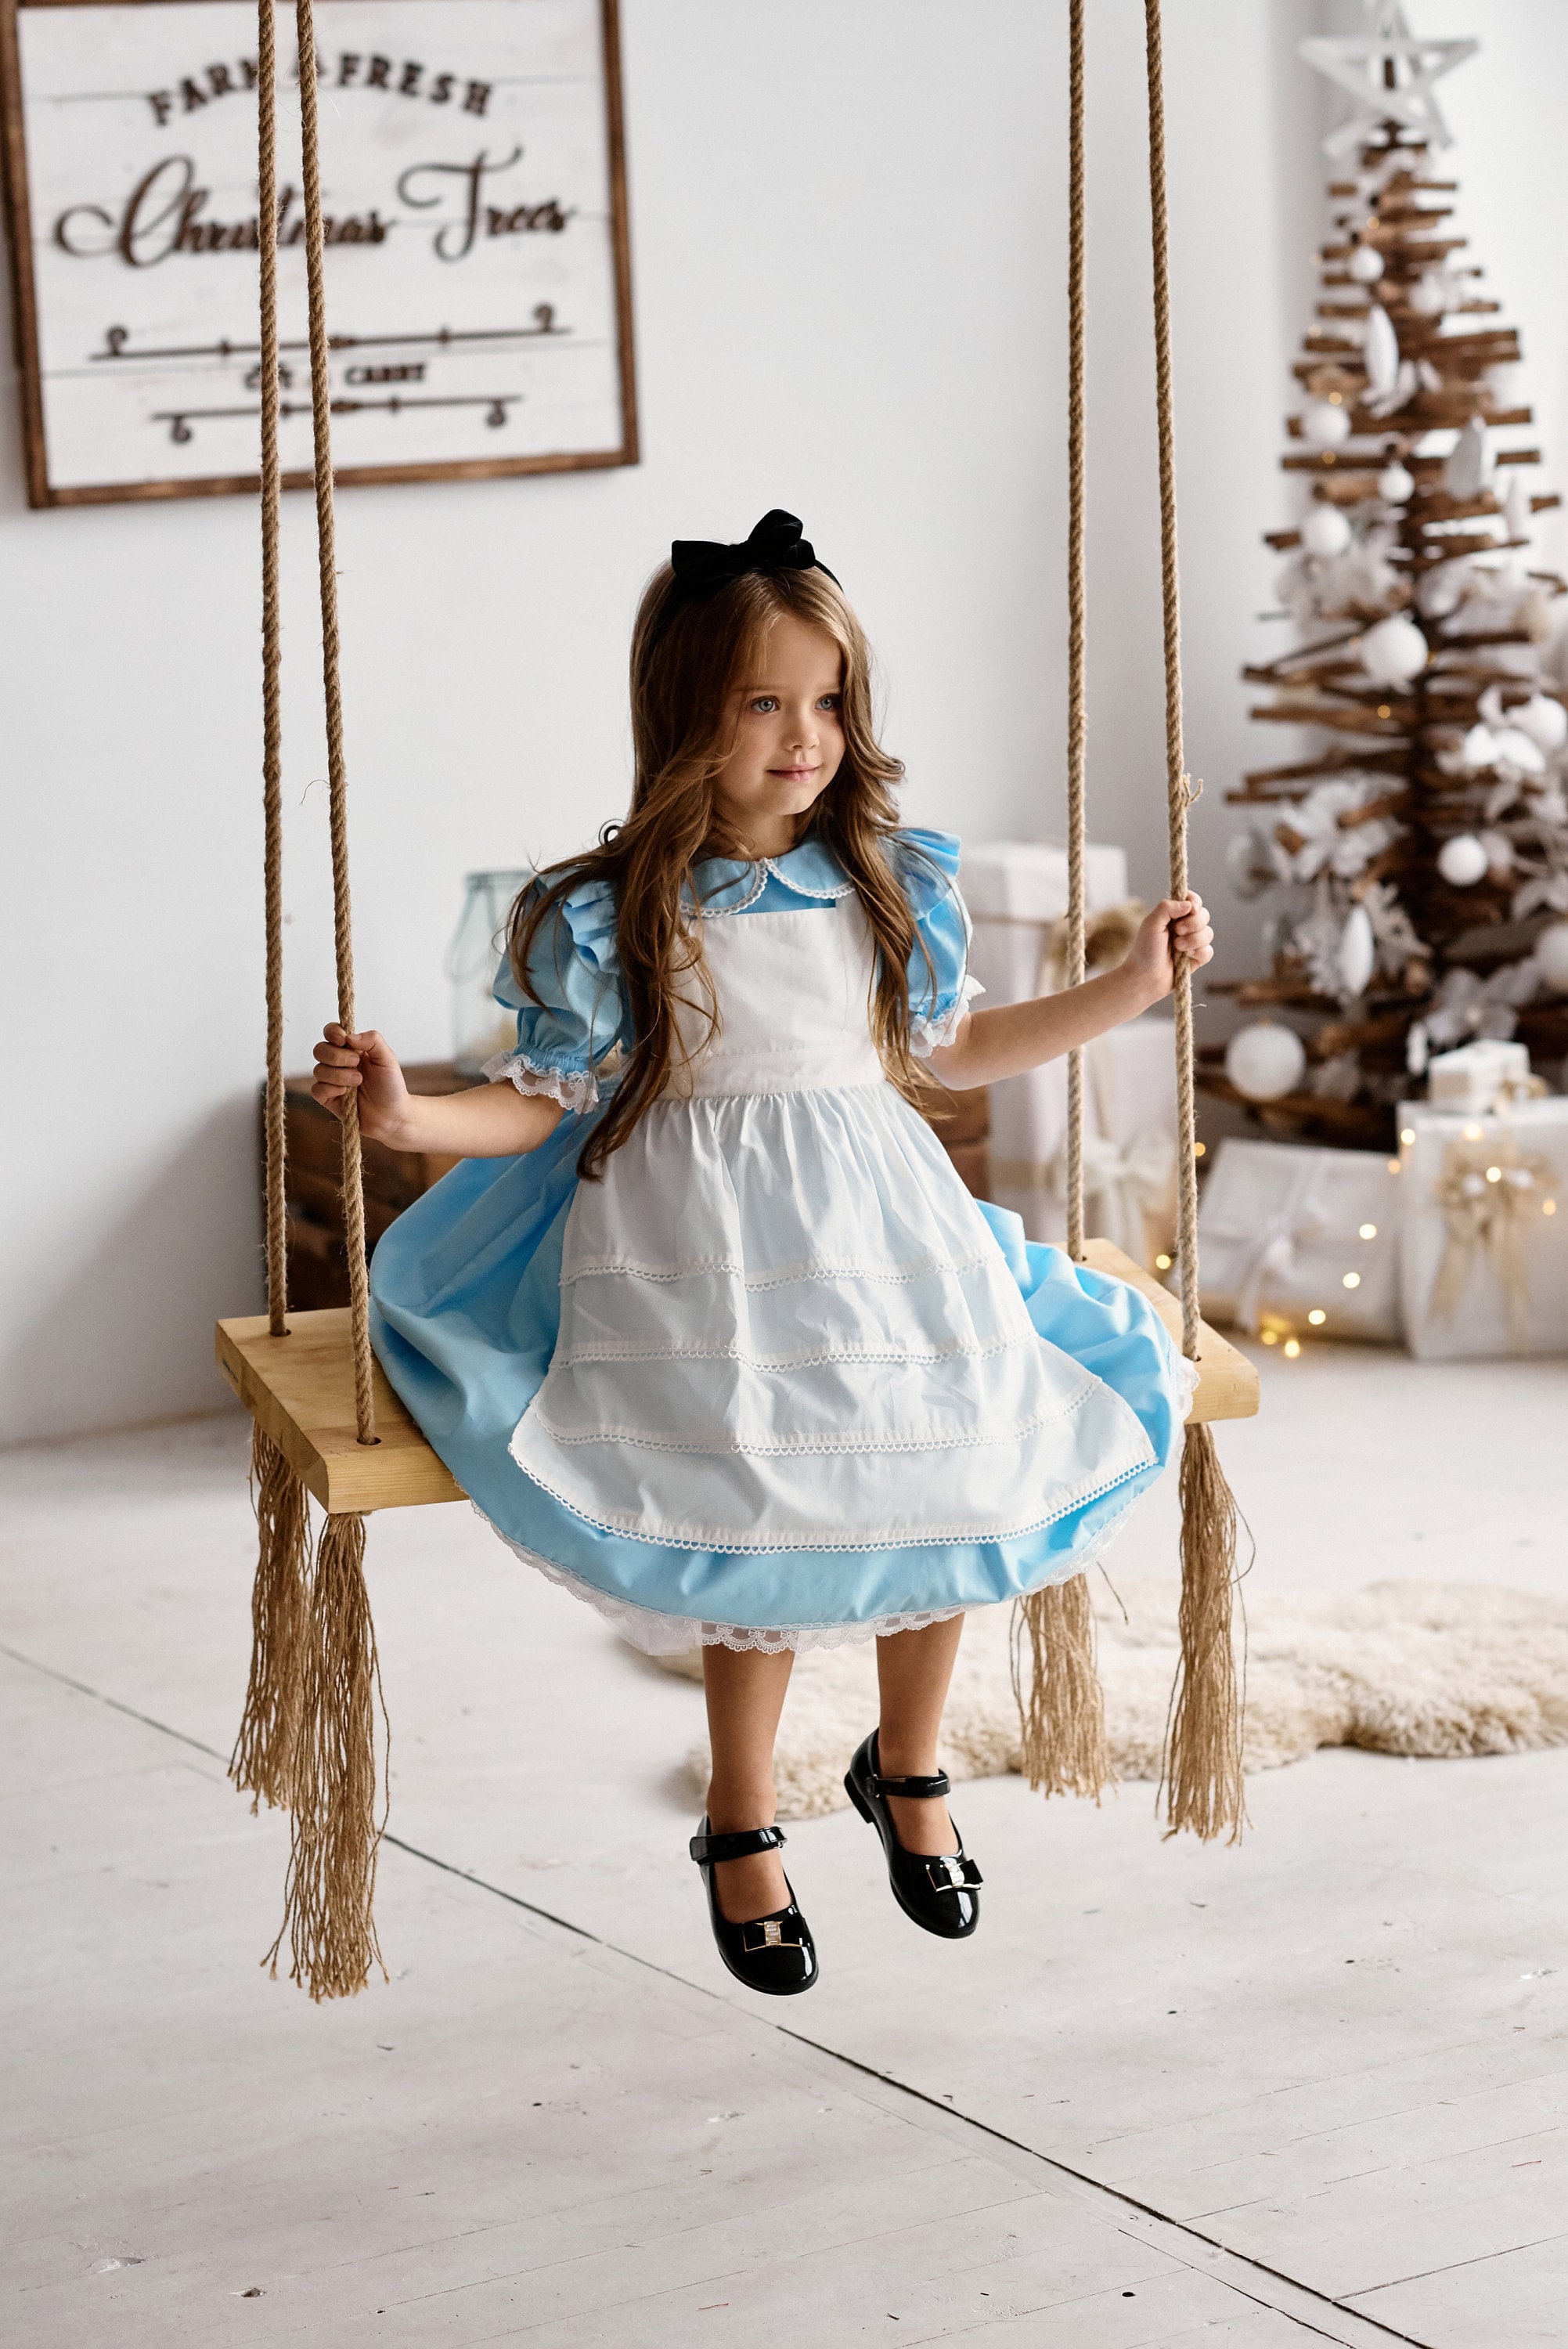 Custom Alice in Wonderland Dress with Pinafore in Baby or Toddler Sizes.  $70.00, via .